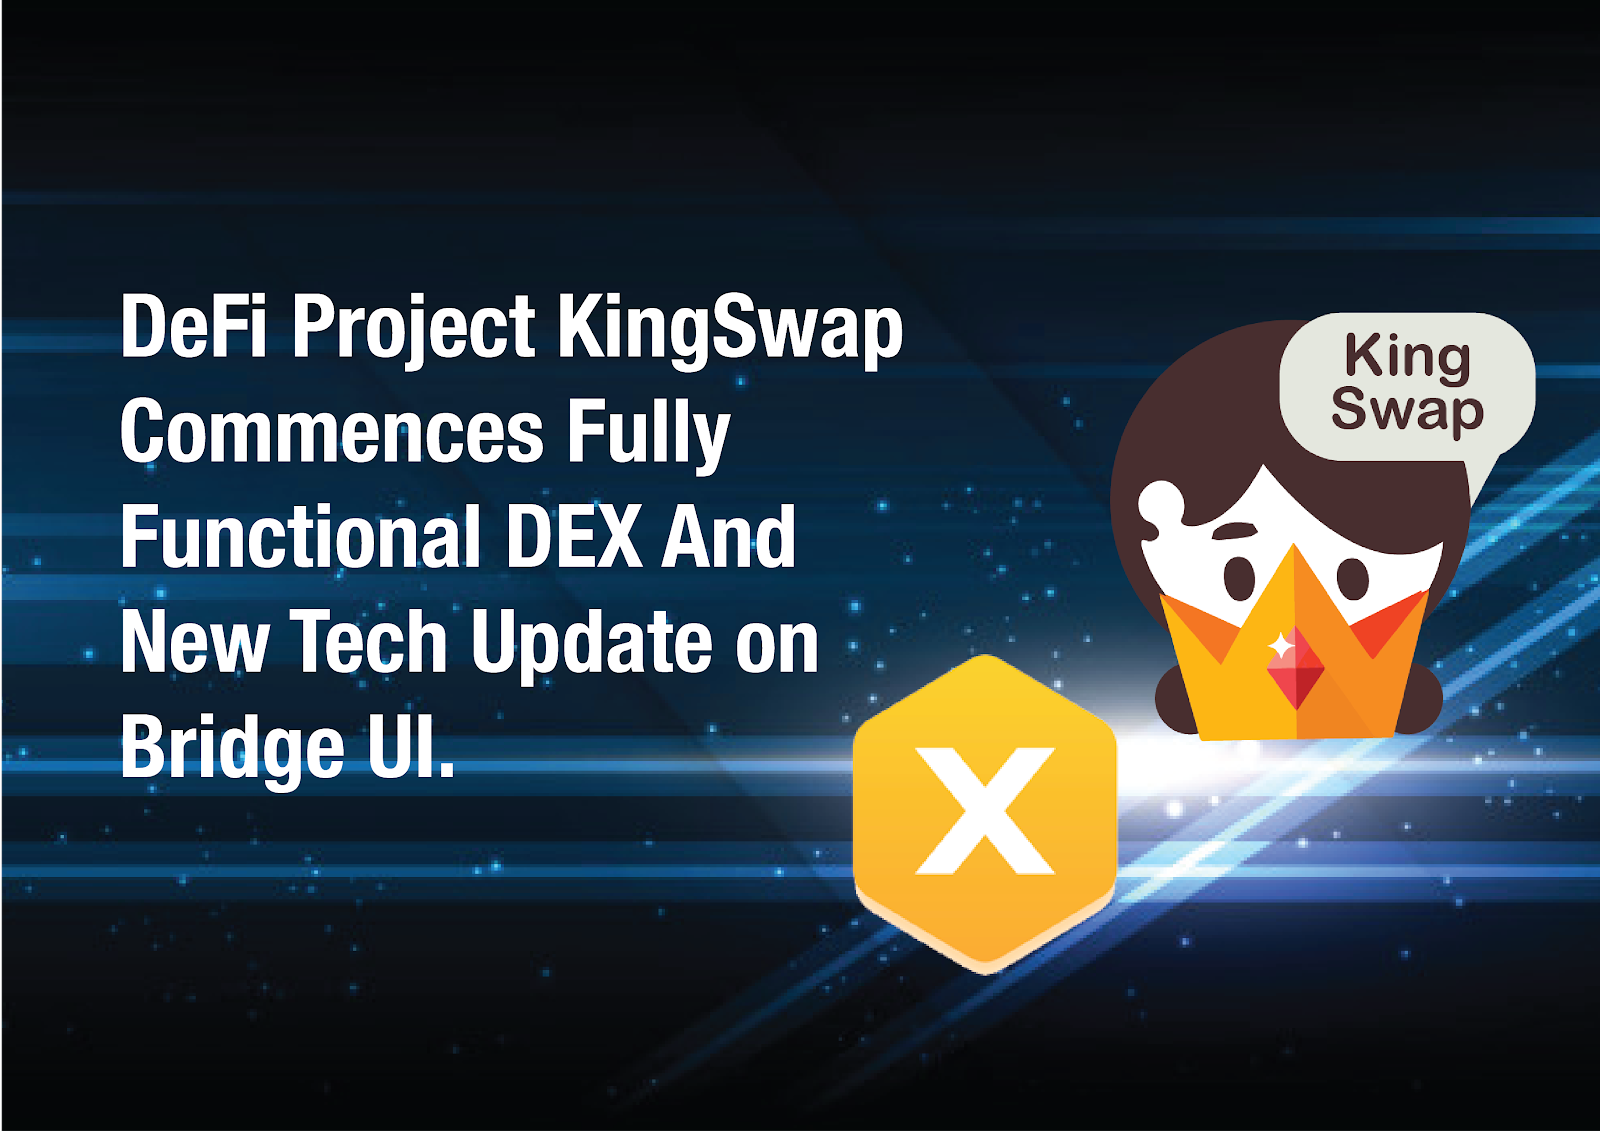 DeFi Project KingSwap Announces Fully Functional DEX and Major Tech Update with Deployment of Bridge UI